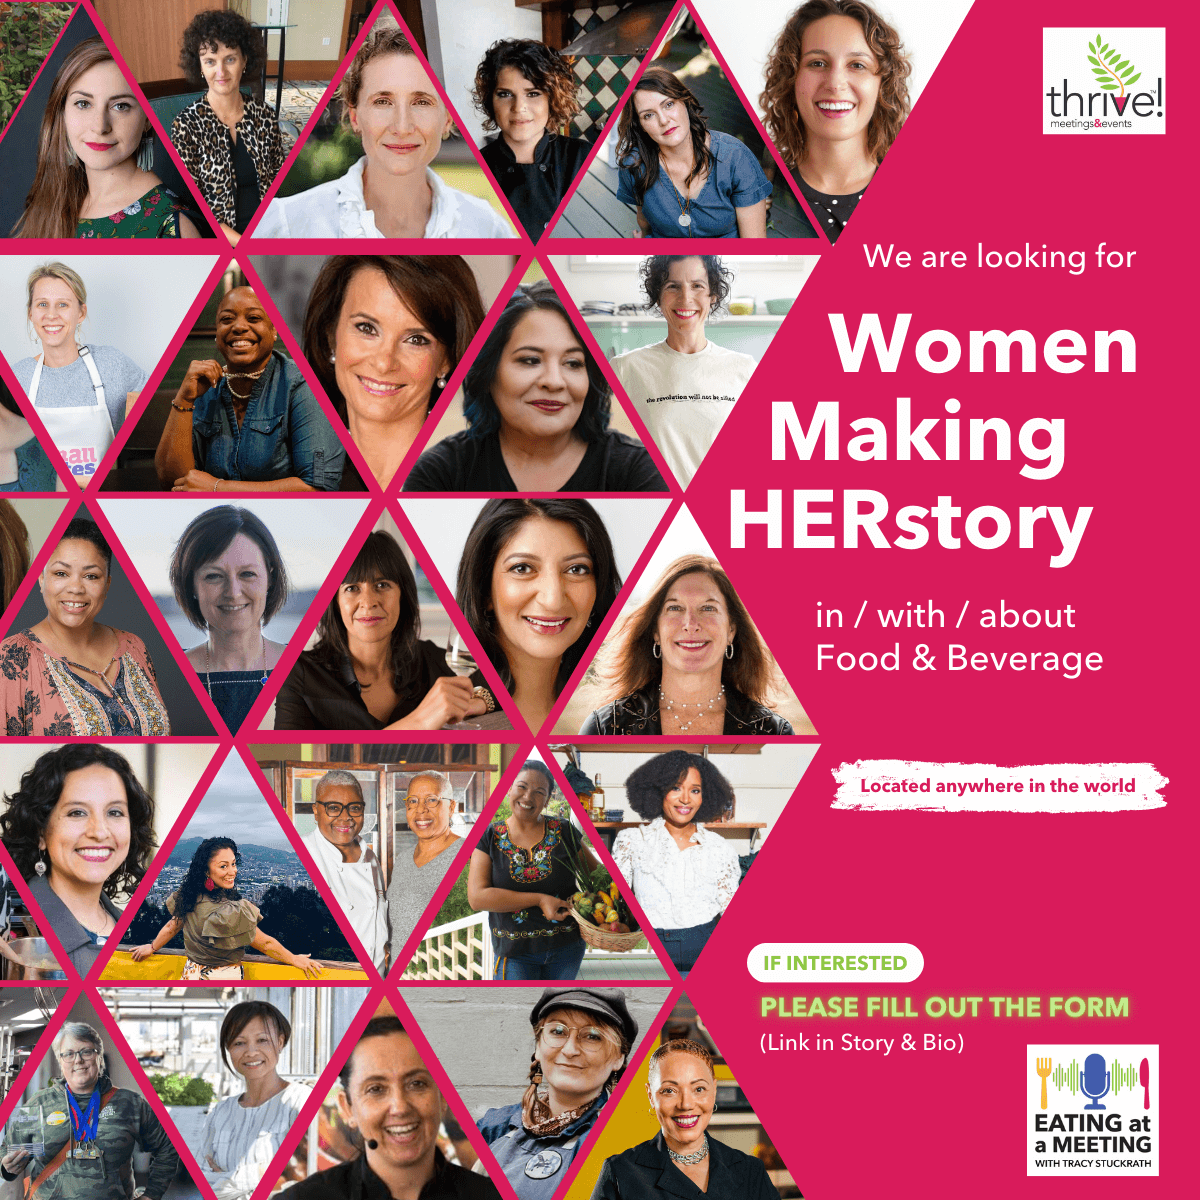 A grid of photos of women promoting the nomination for Women's HERstory month celebrating women in/on/about food and beverage